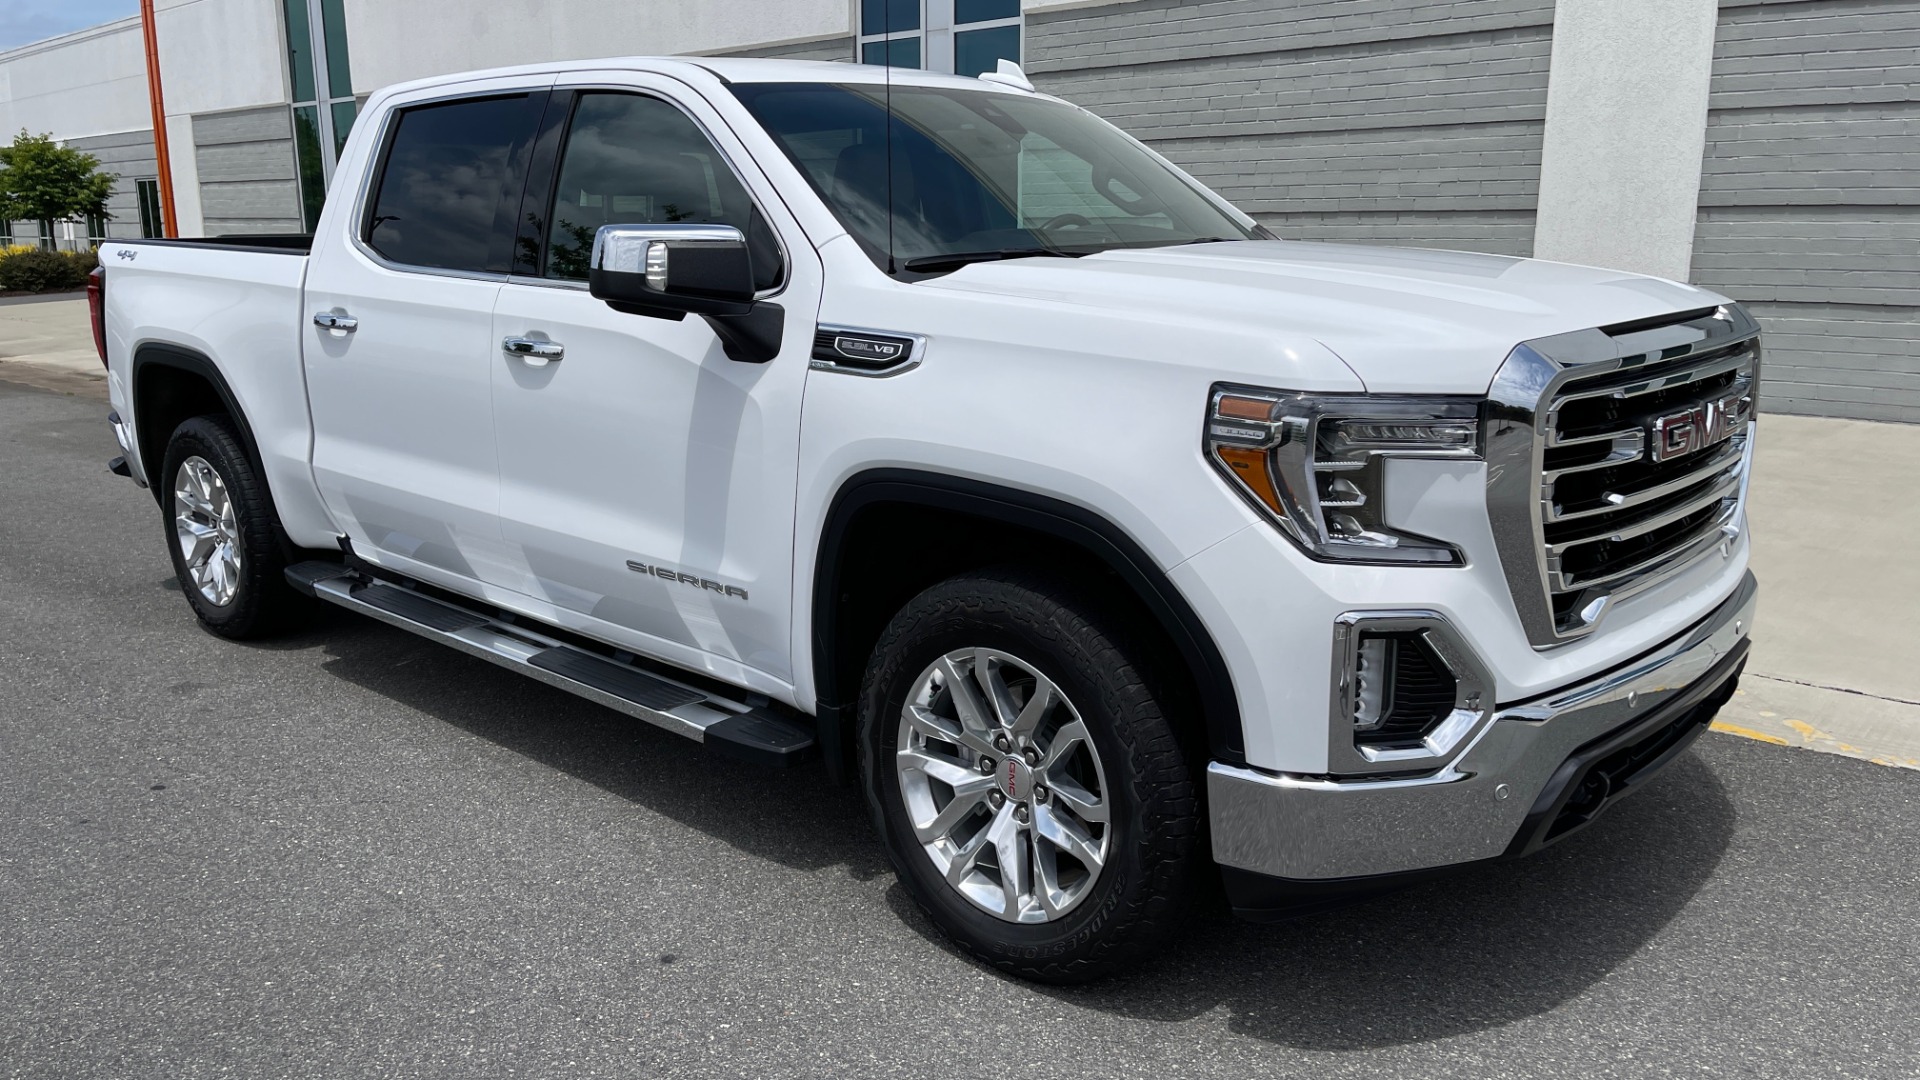 Used 2019 GMC SIERRA 1500 SLT 4X4 CREWCAB / 5.3L V8 / 8-SPD AUTO / NAV / BOSE / REARVIEW for sale Sold at Formula Imports in Charlotte NC 28227 6